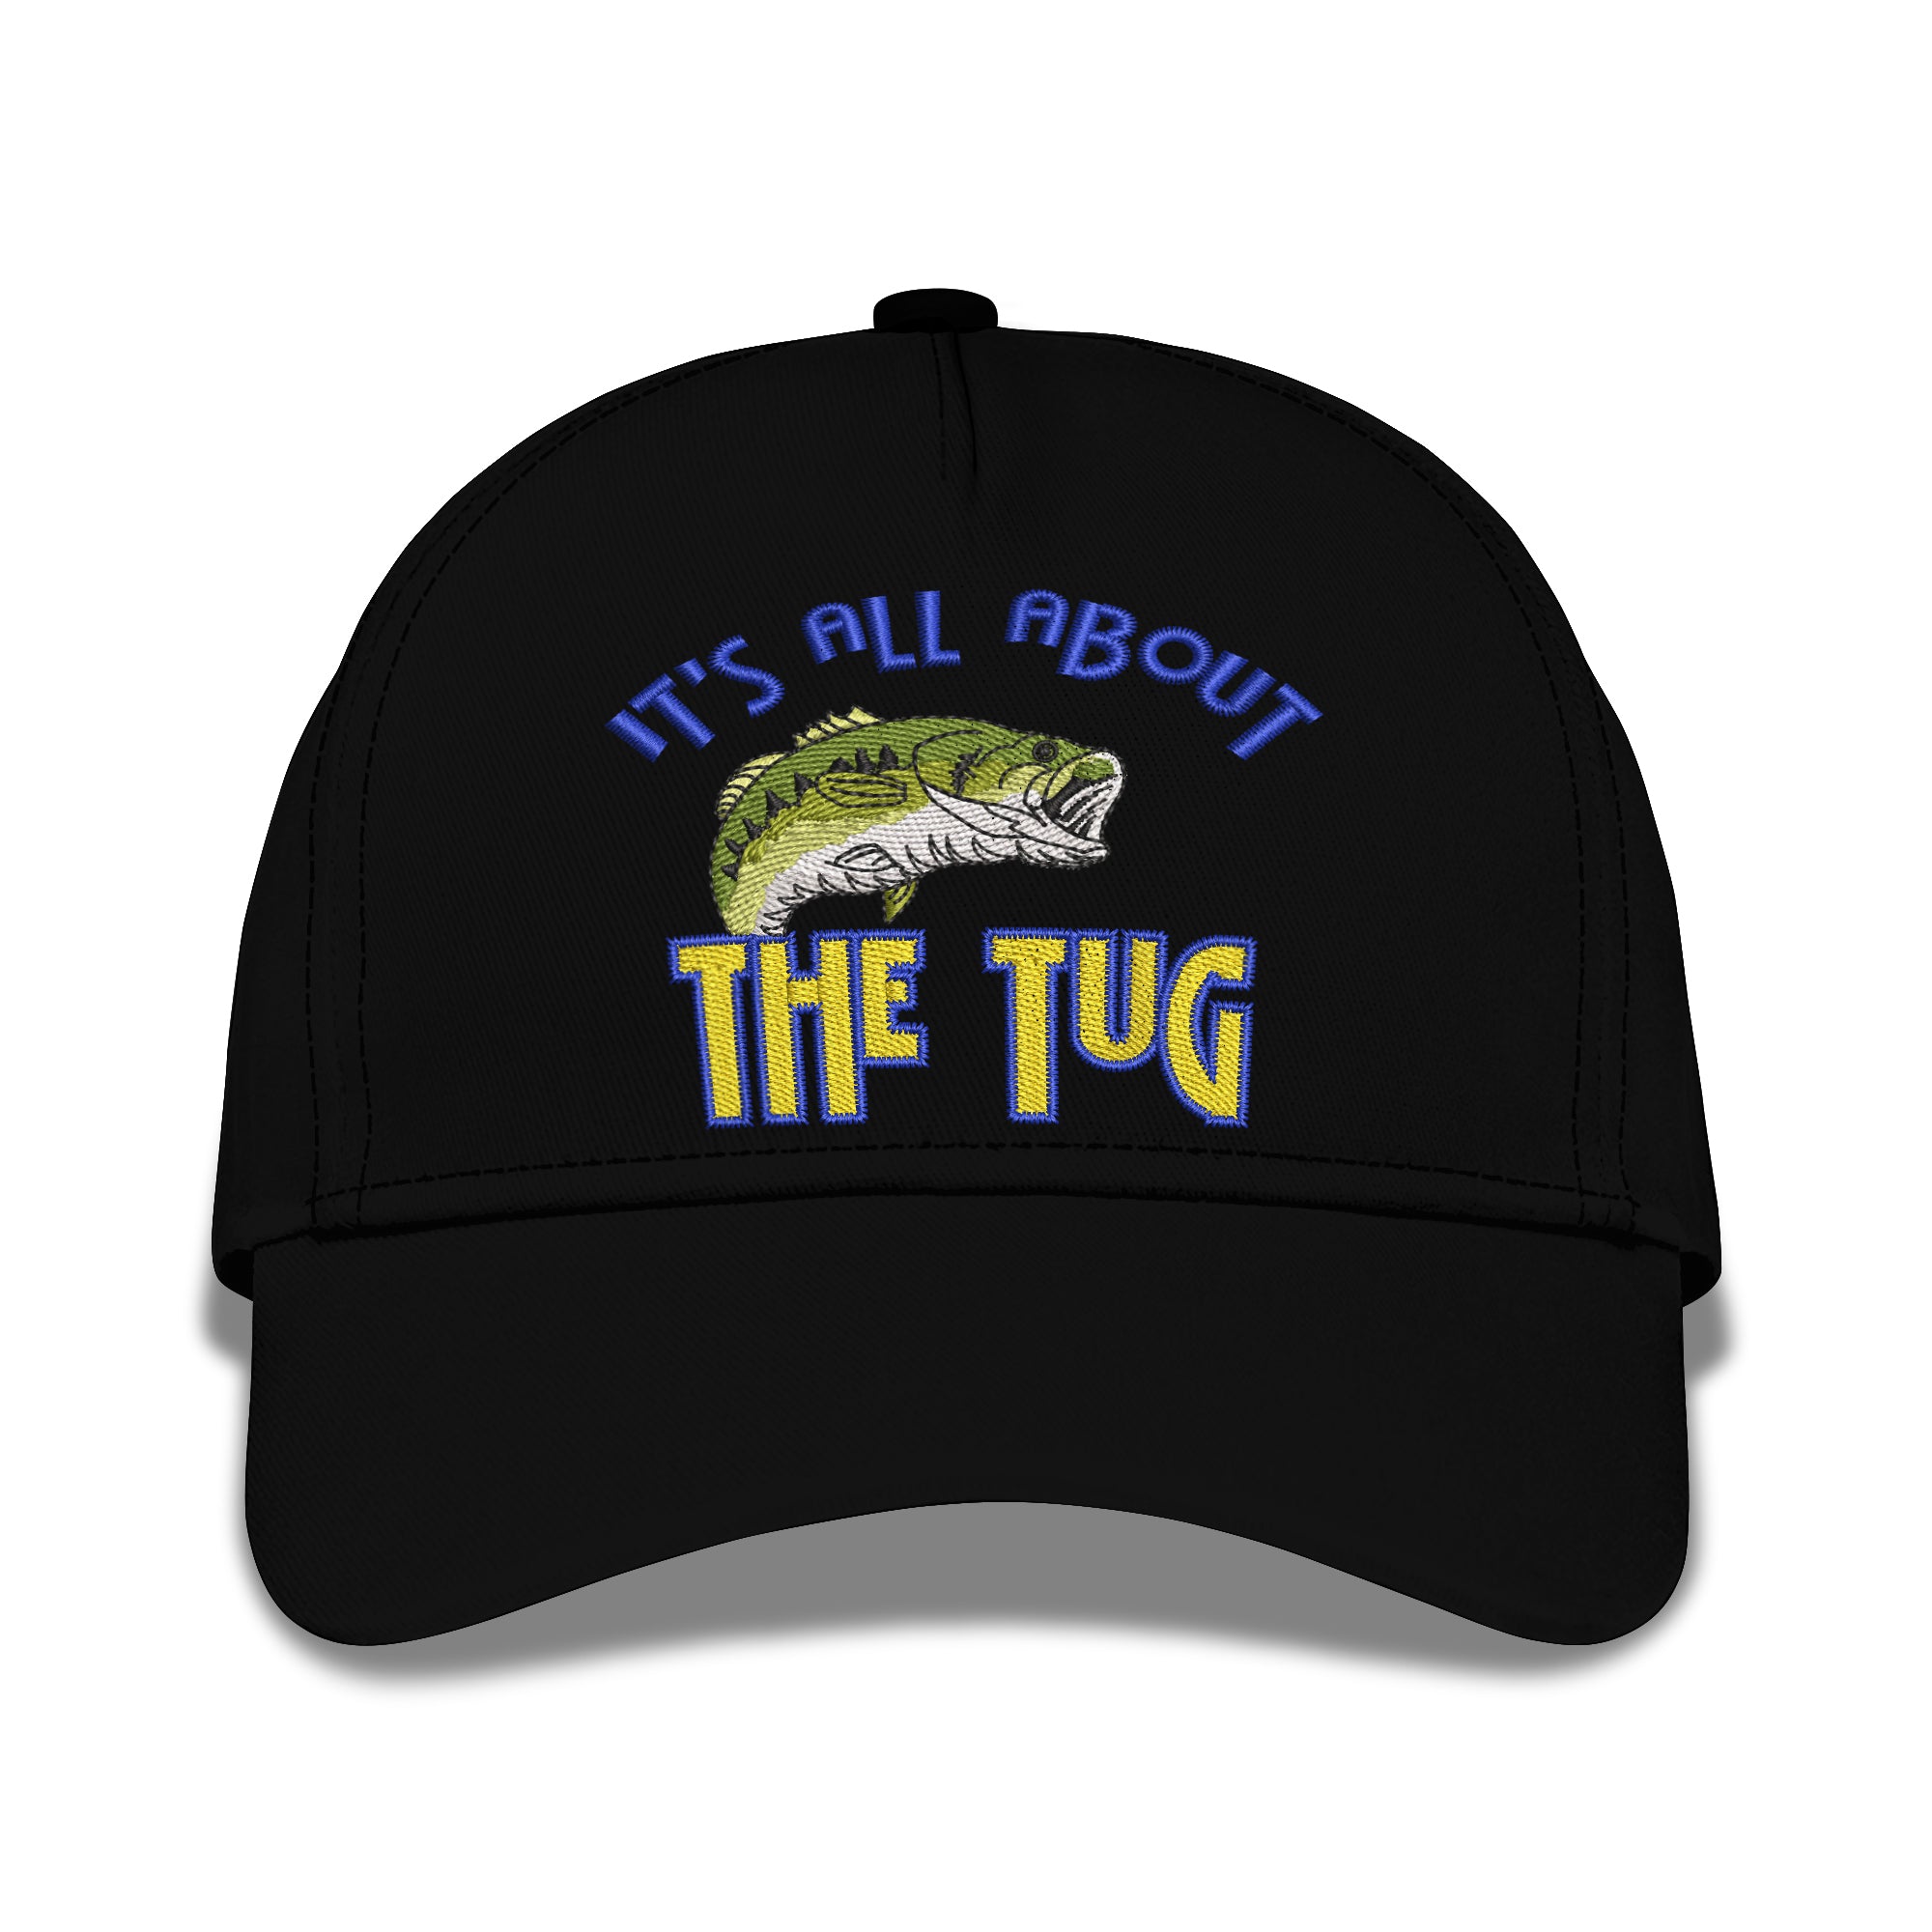 It's All About The Tug Embroidered Baseball Caps Fishing